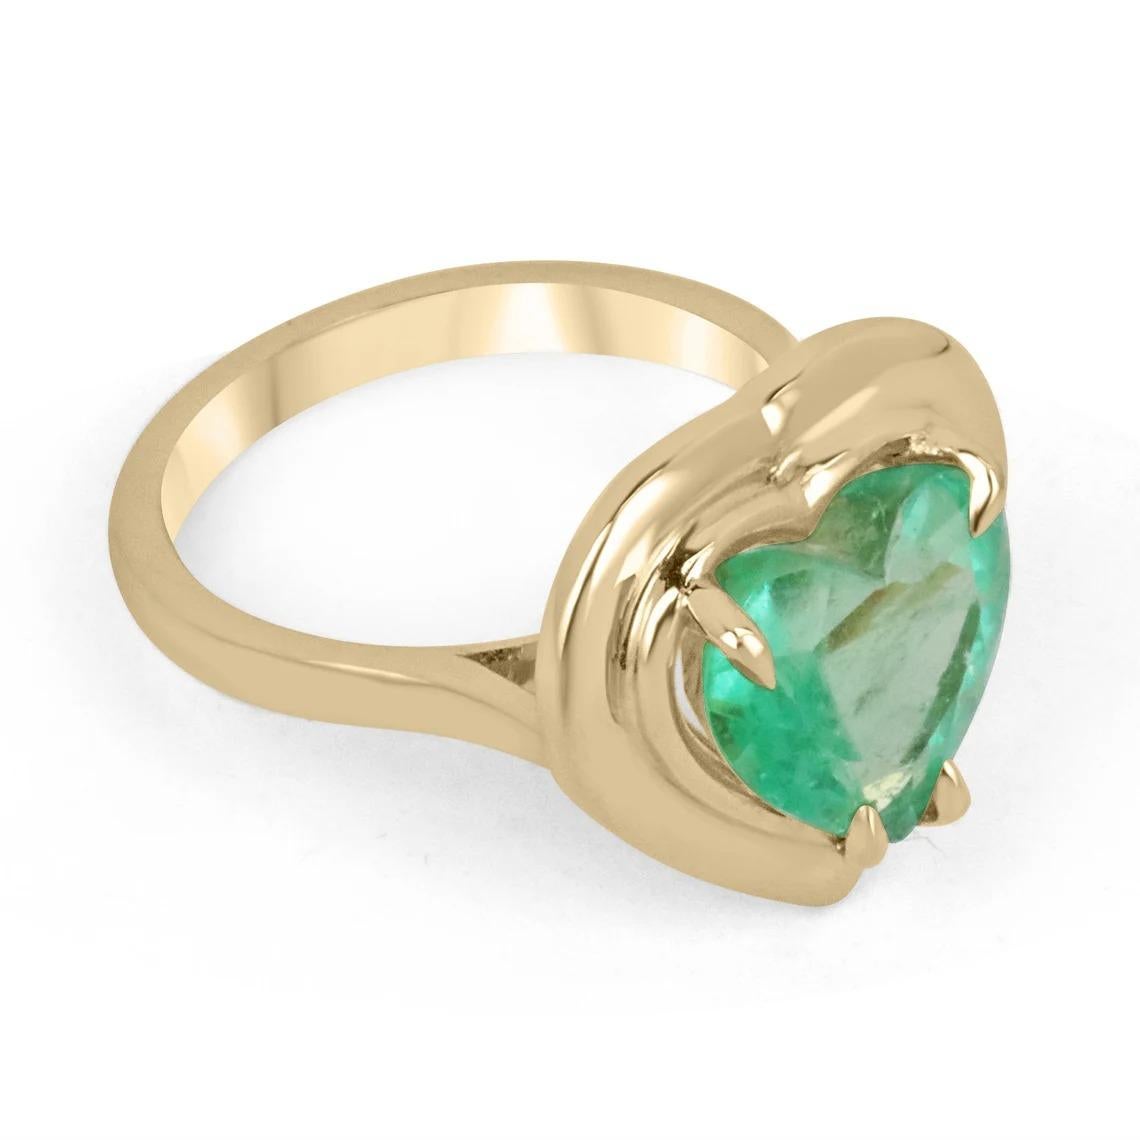 An edgy solitaire heart one of a kind emerald statement ring. This fabulous piece features a natural heart-cut Colombian emerald that showcases a medium vivid green color, with excellent to very good luster and clarity. This Colombian emerald